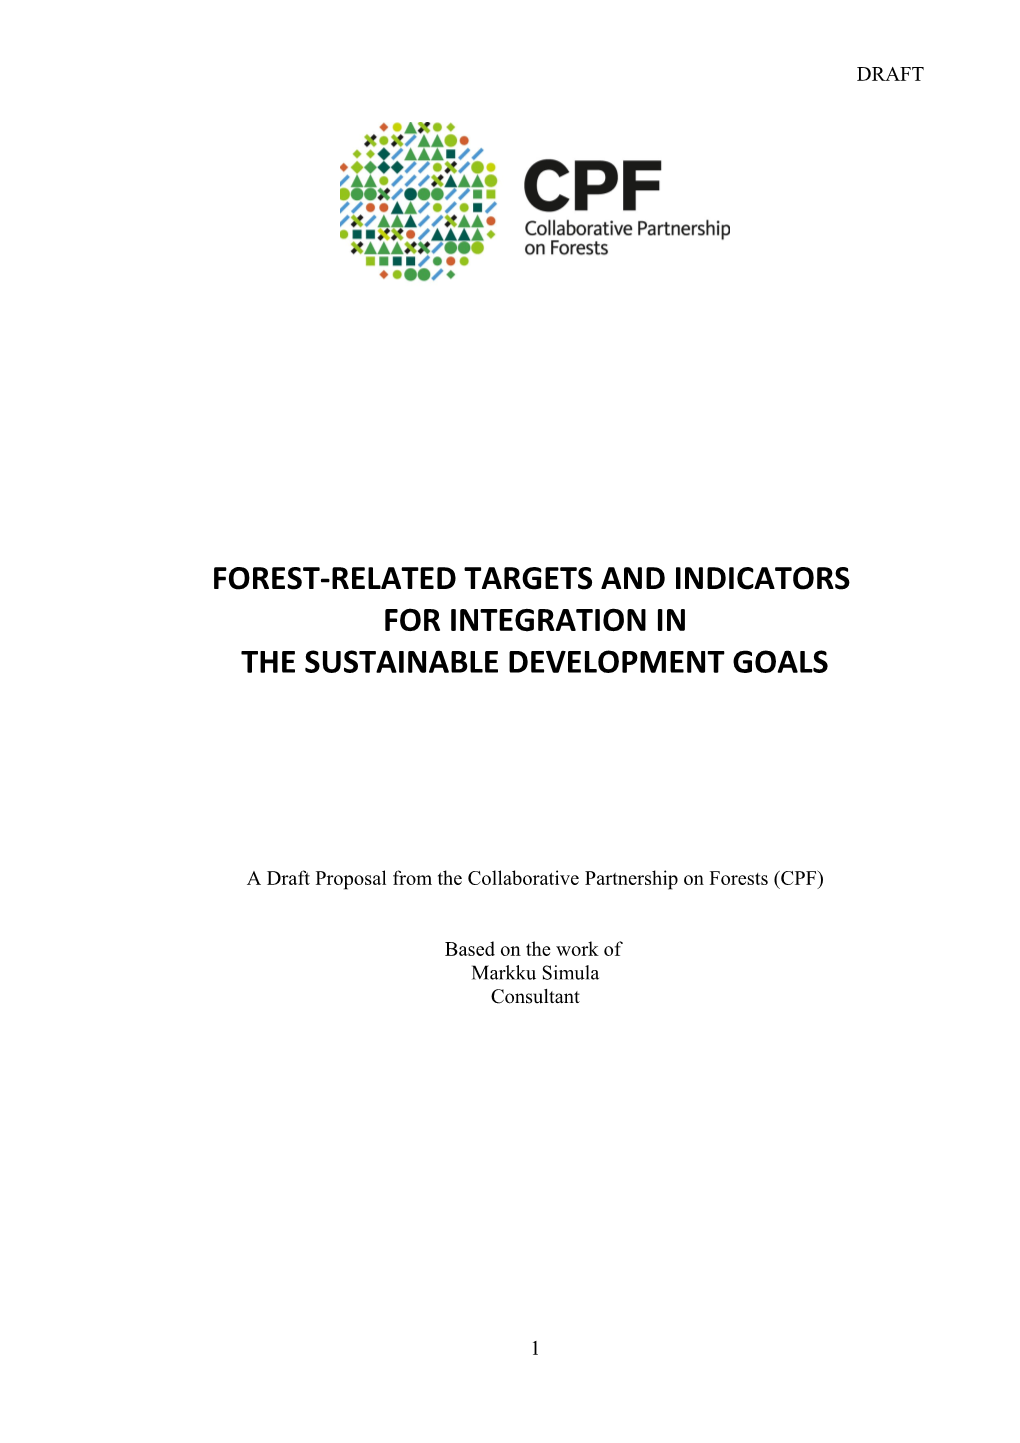 Forest-Related Targets and Indicators